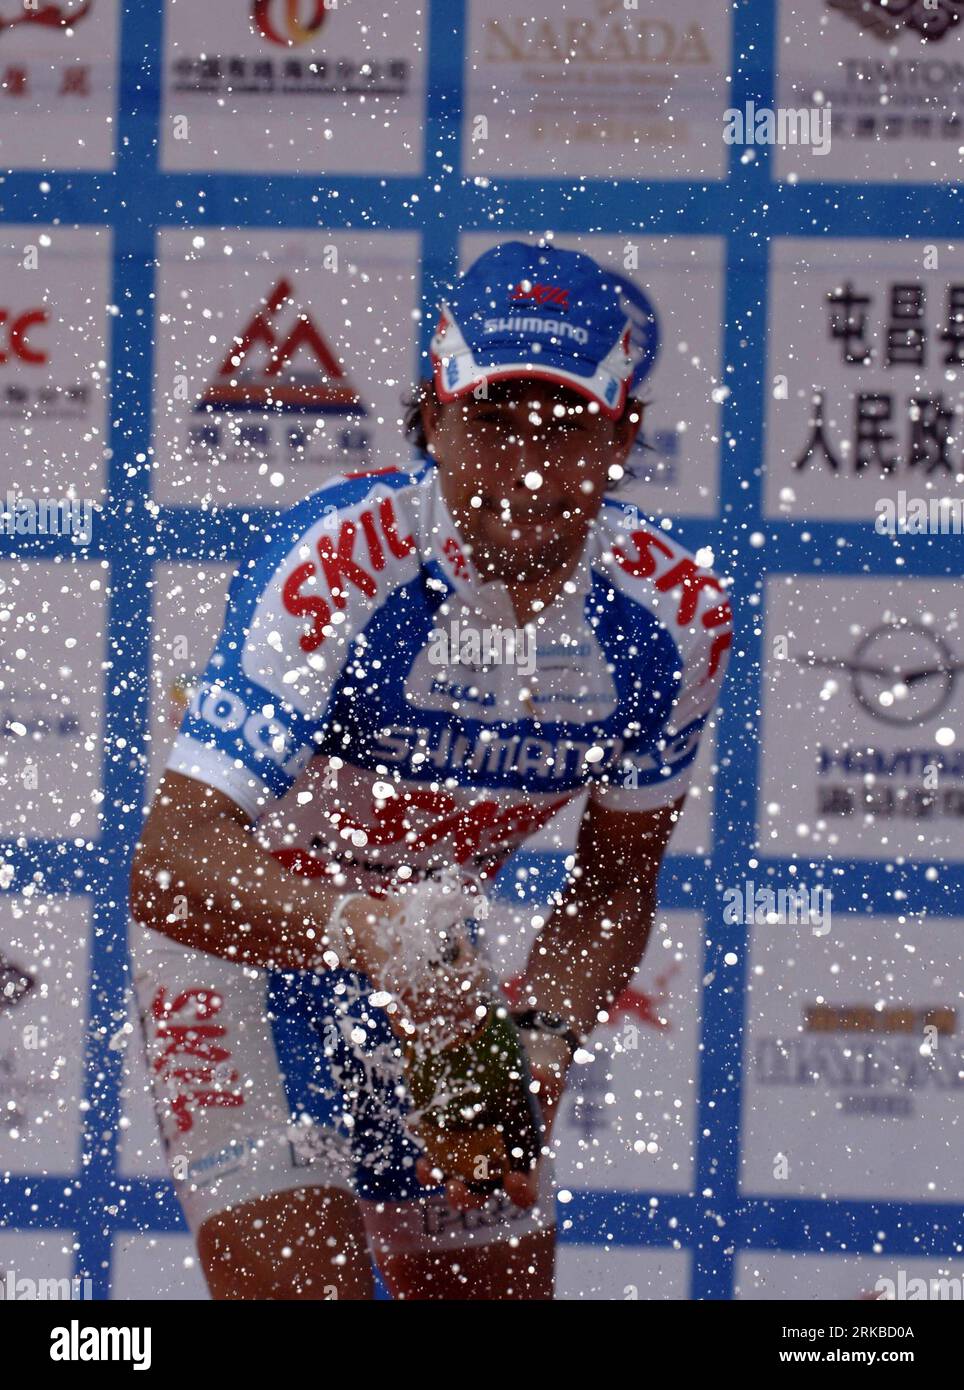 Bildnummer: 54537409  Datum: 14.10.2010  Copyright: imago/Xinhua (101014)-- QIONGHAI, Oct.14, 2010(Xinhua) -- Dutch rider Kenny van Hummel of Skil-Shimano team sprays champagne to celebrate during the awarding ceremony for the fourth stage competition at the Tour of Hainan International Road Cycling Race 2010 in Qionghai, south China s Hainan Province, on Oct. 14, 2010. The Dutch rider claimed the title of the stage with a time of 2 hours, 19 minutes and 37 seconds. (Xinhua/Hou Jiansen) CHINA-QIONGHAI-2010 INTERNATIONAL ROAD CYCLING RACE-THE 4TH STAGE (CN) PUBLICATIONxNOTxINxCHN Rad Radsport S Stock Photo